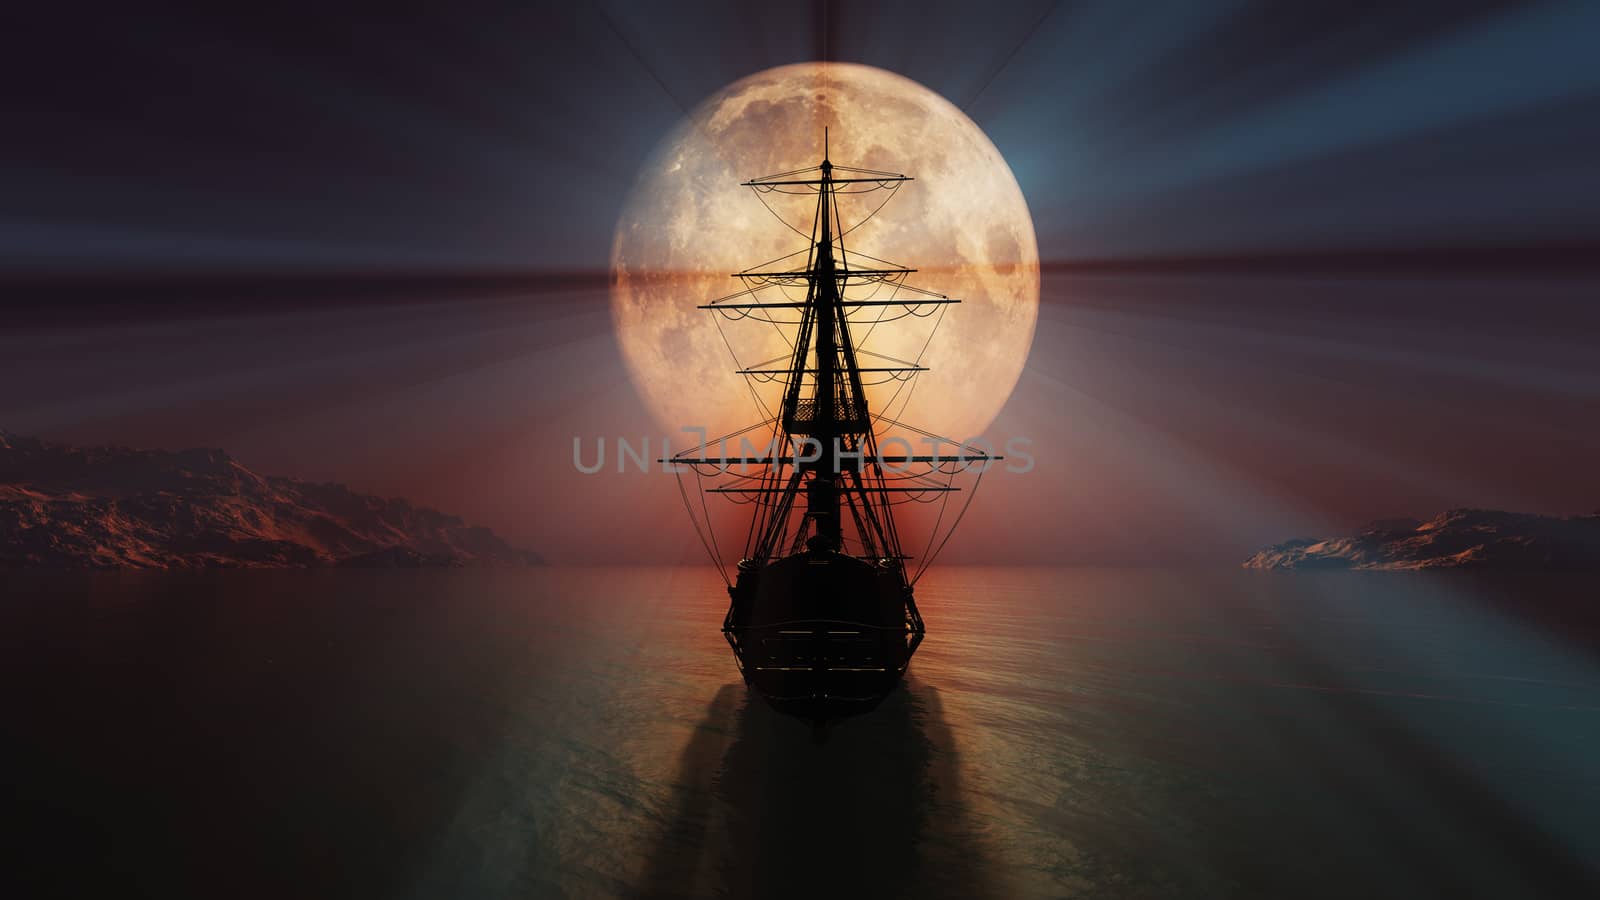 old ship in the night full moon illustration by alex_nako